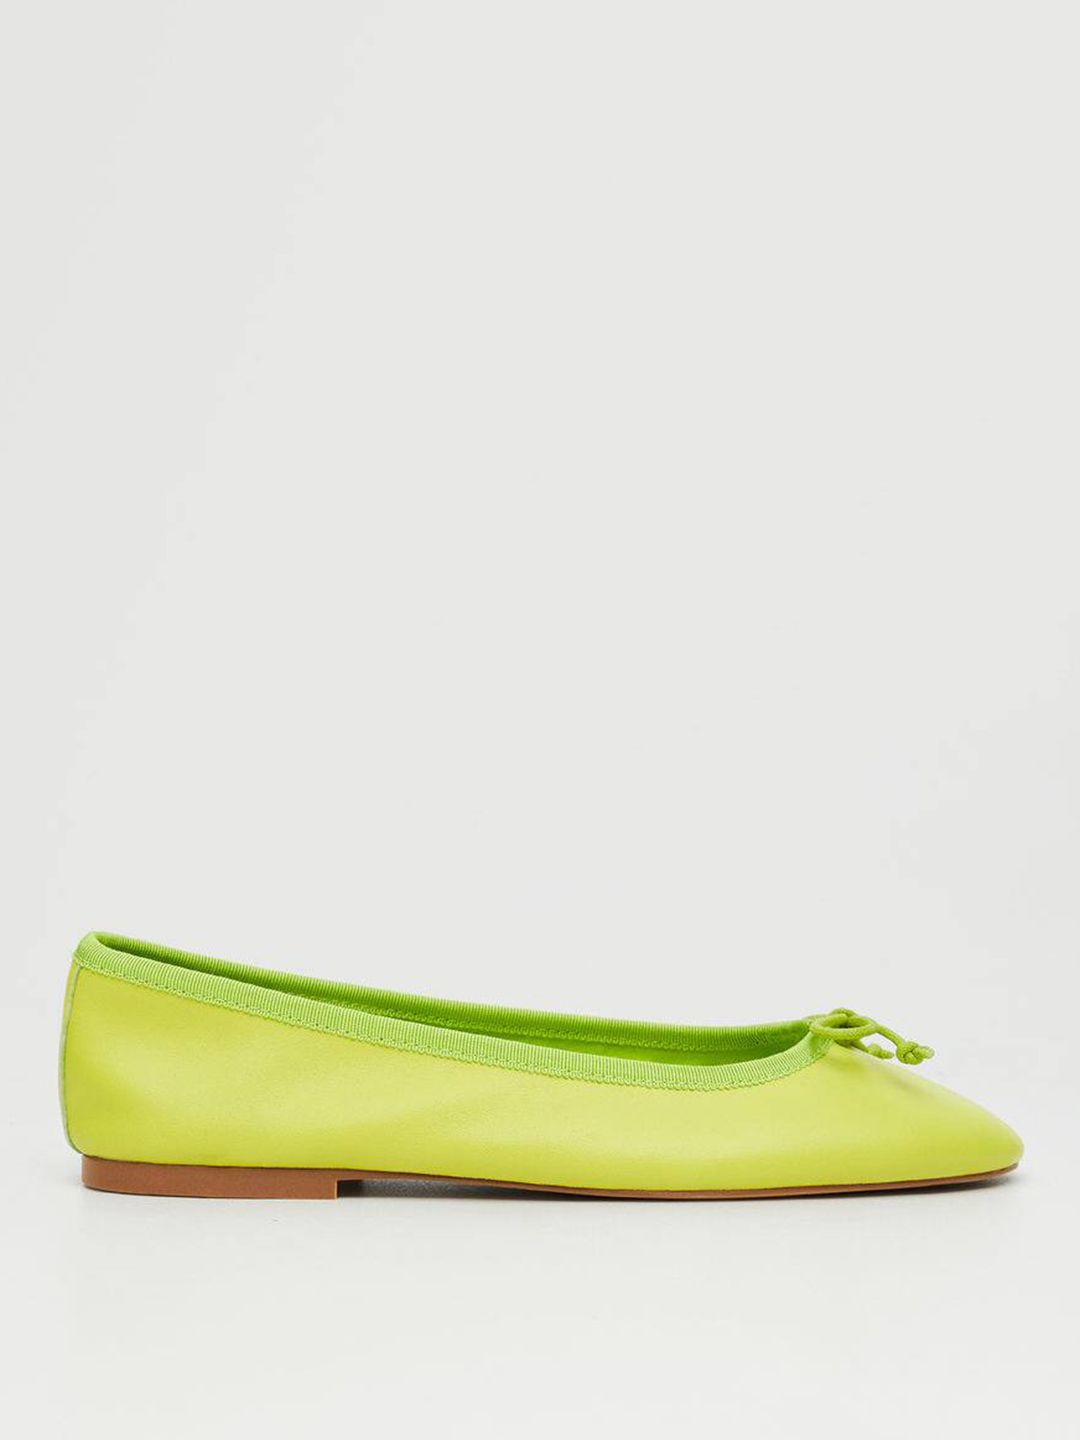 MANGO Women Fluorescent Green Ballerinas with Bows Price in India